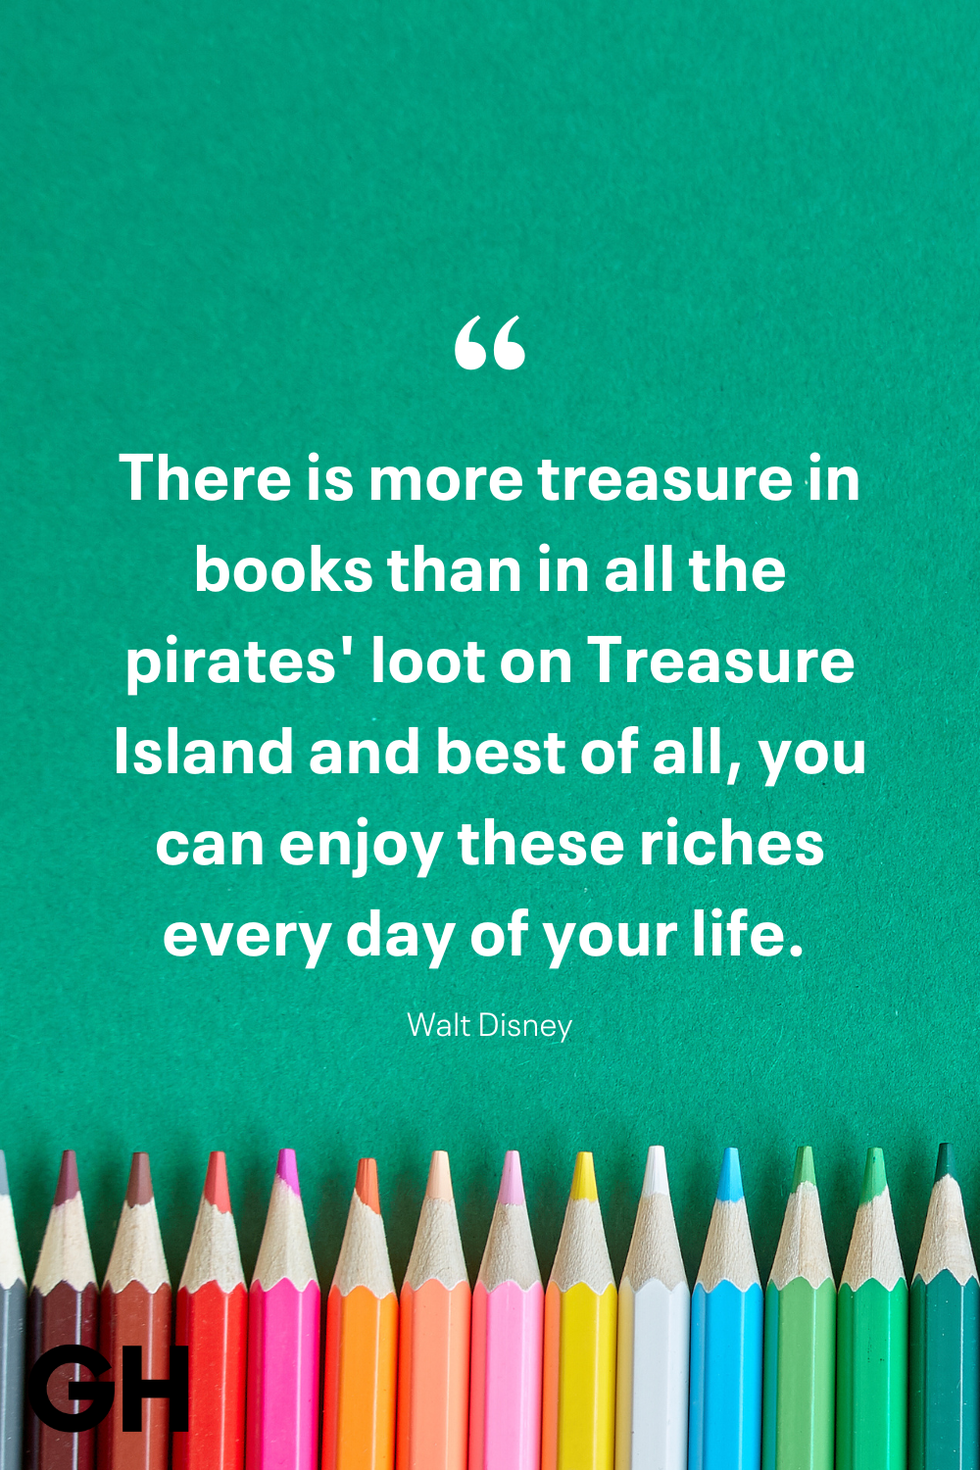 there is more treasure in books than in all the pirates' loot on treasure island and best of all you can enjoy these riches every day of your life walt disney